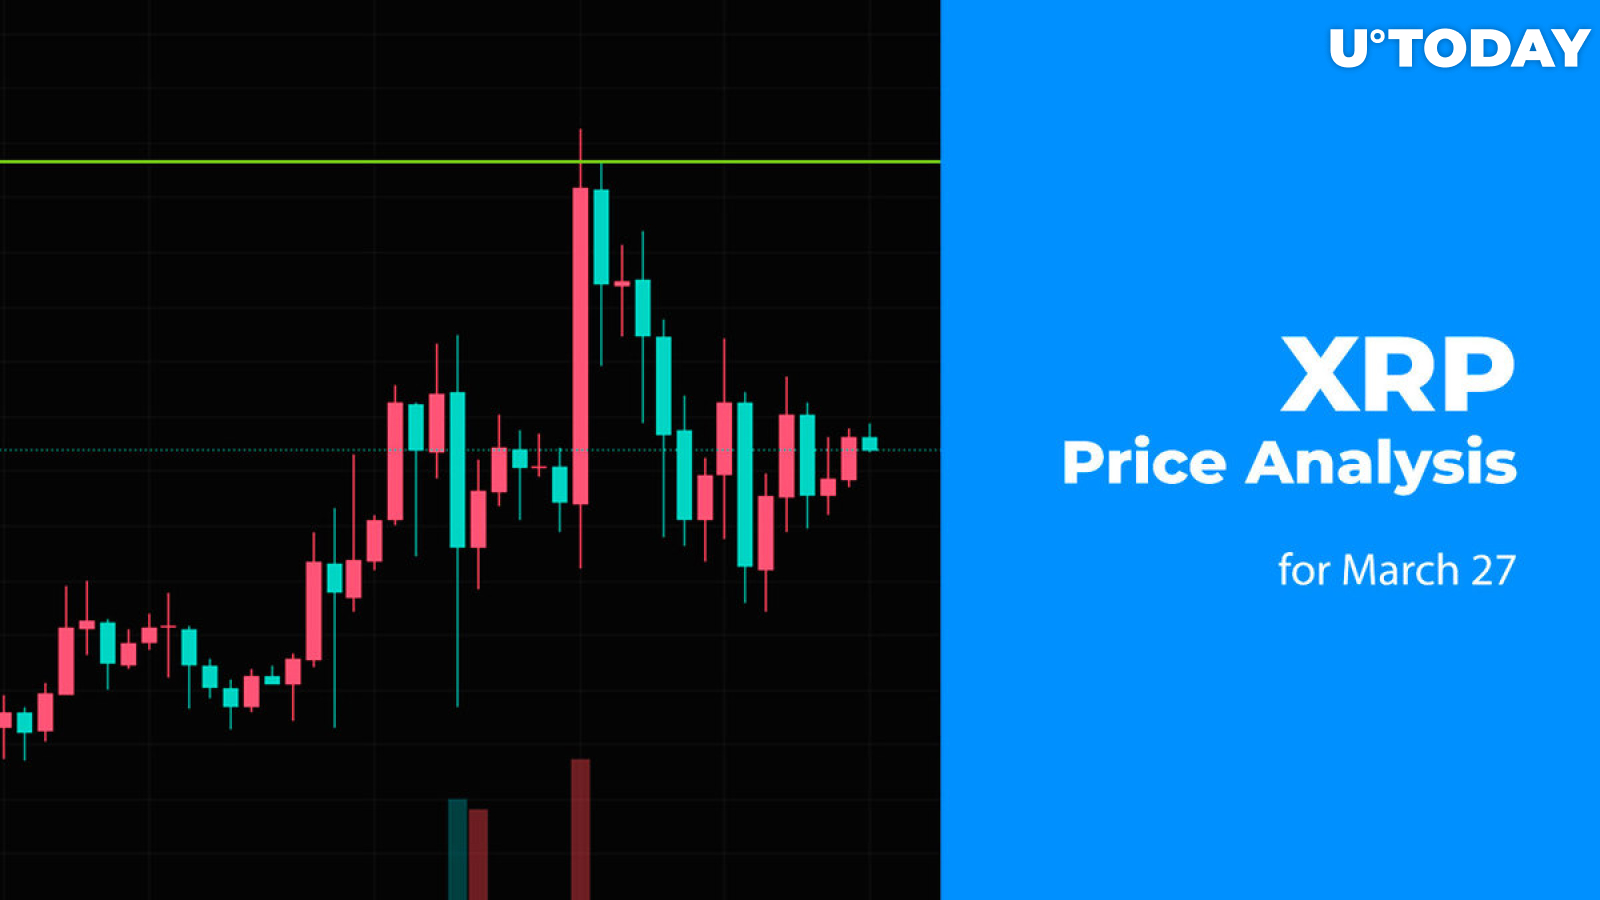 XRP Price Prediction for March 27